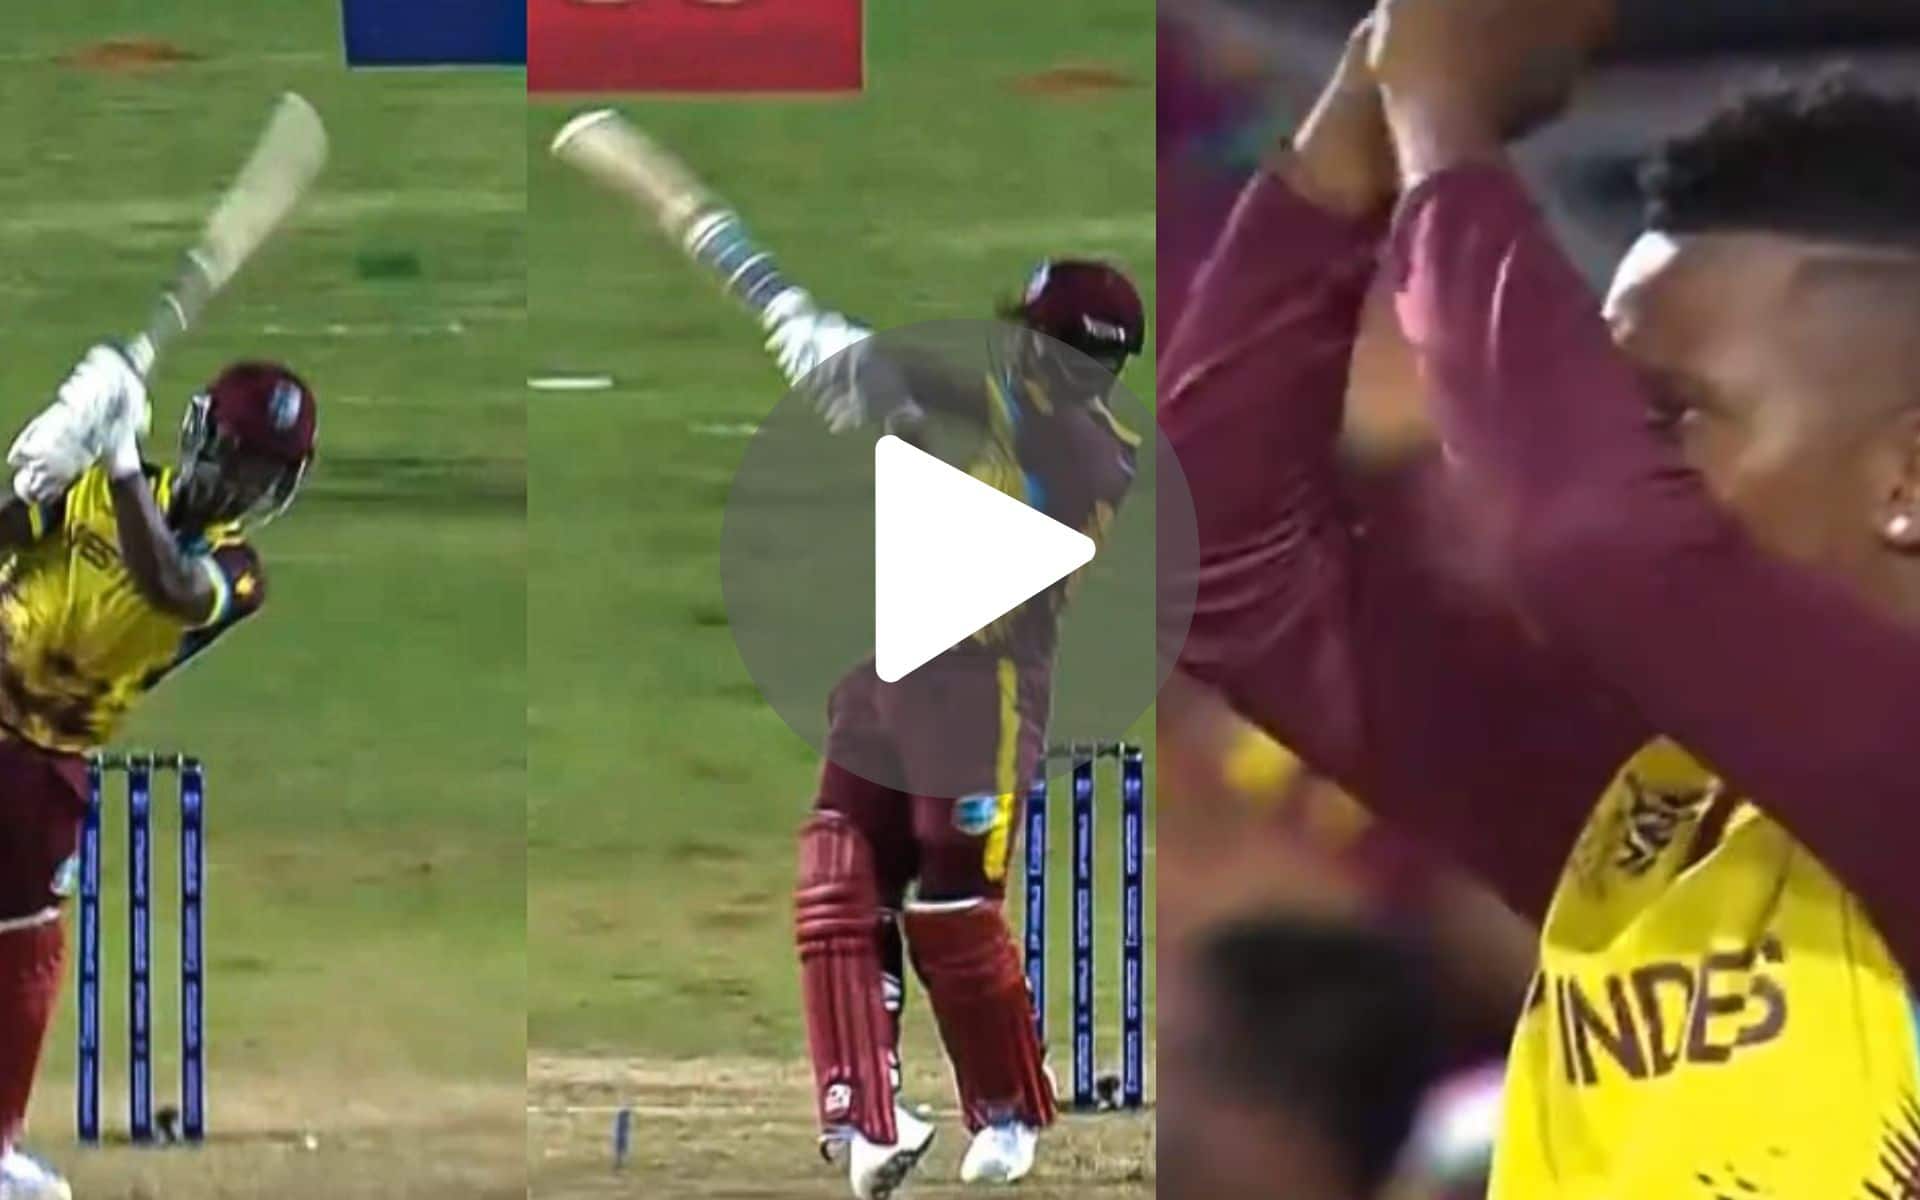 [Watch] Teammates Applaud As Sherfane Rutherford's Explosive Knock Propels WI To 149